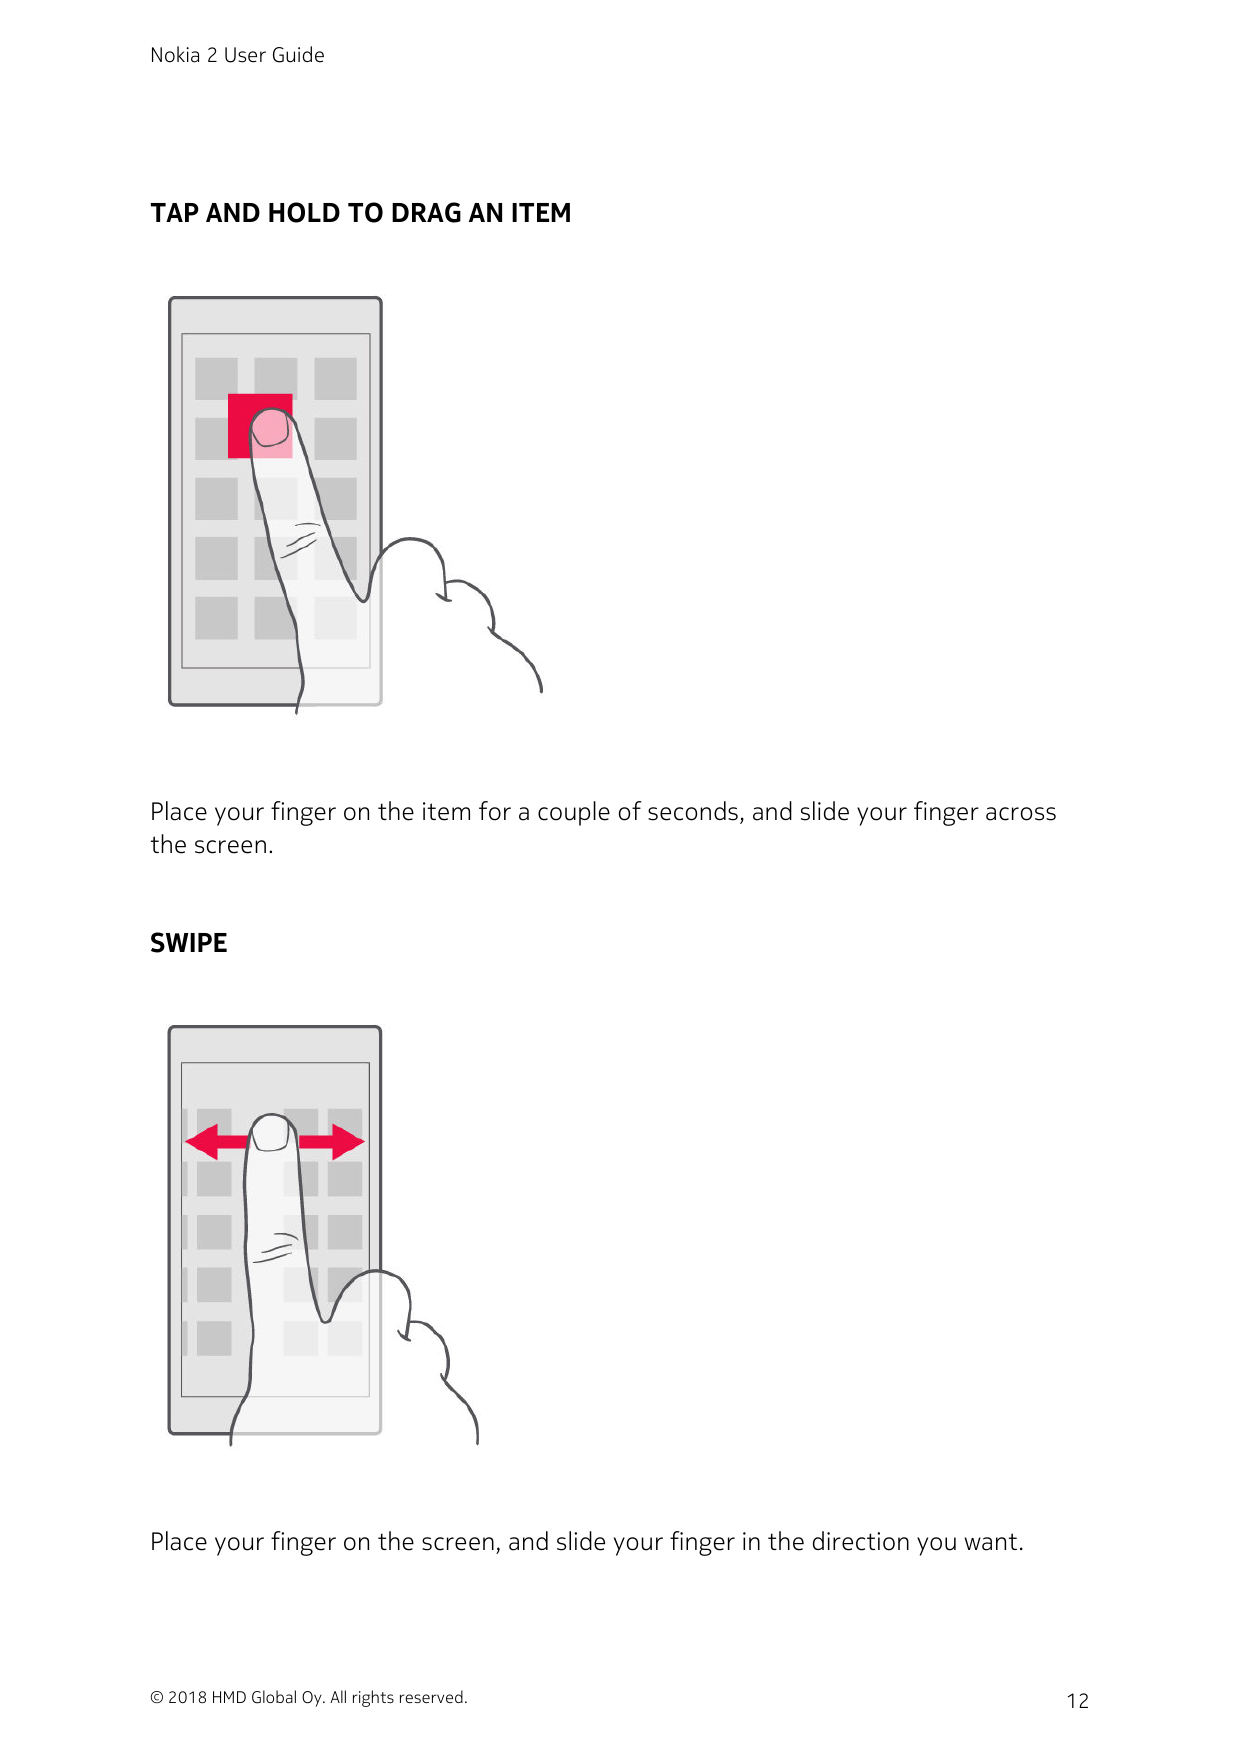 Nokia 2 User GuideTAP AND HOLD TO DRAG AN ITEMPlace your finger on the item for a couple of seconds, and slide your finger acros